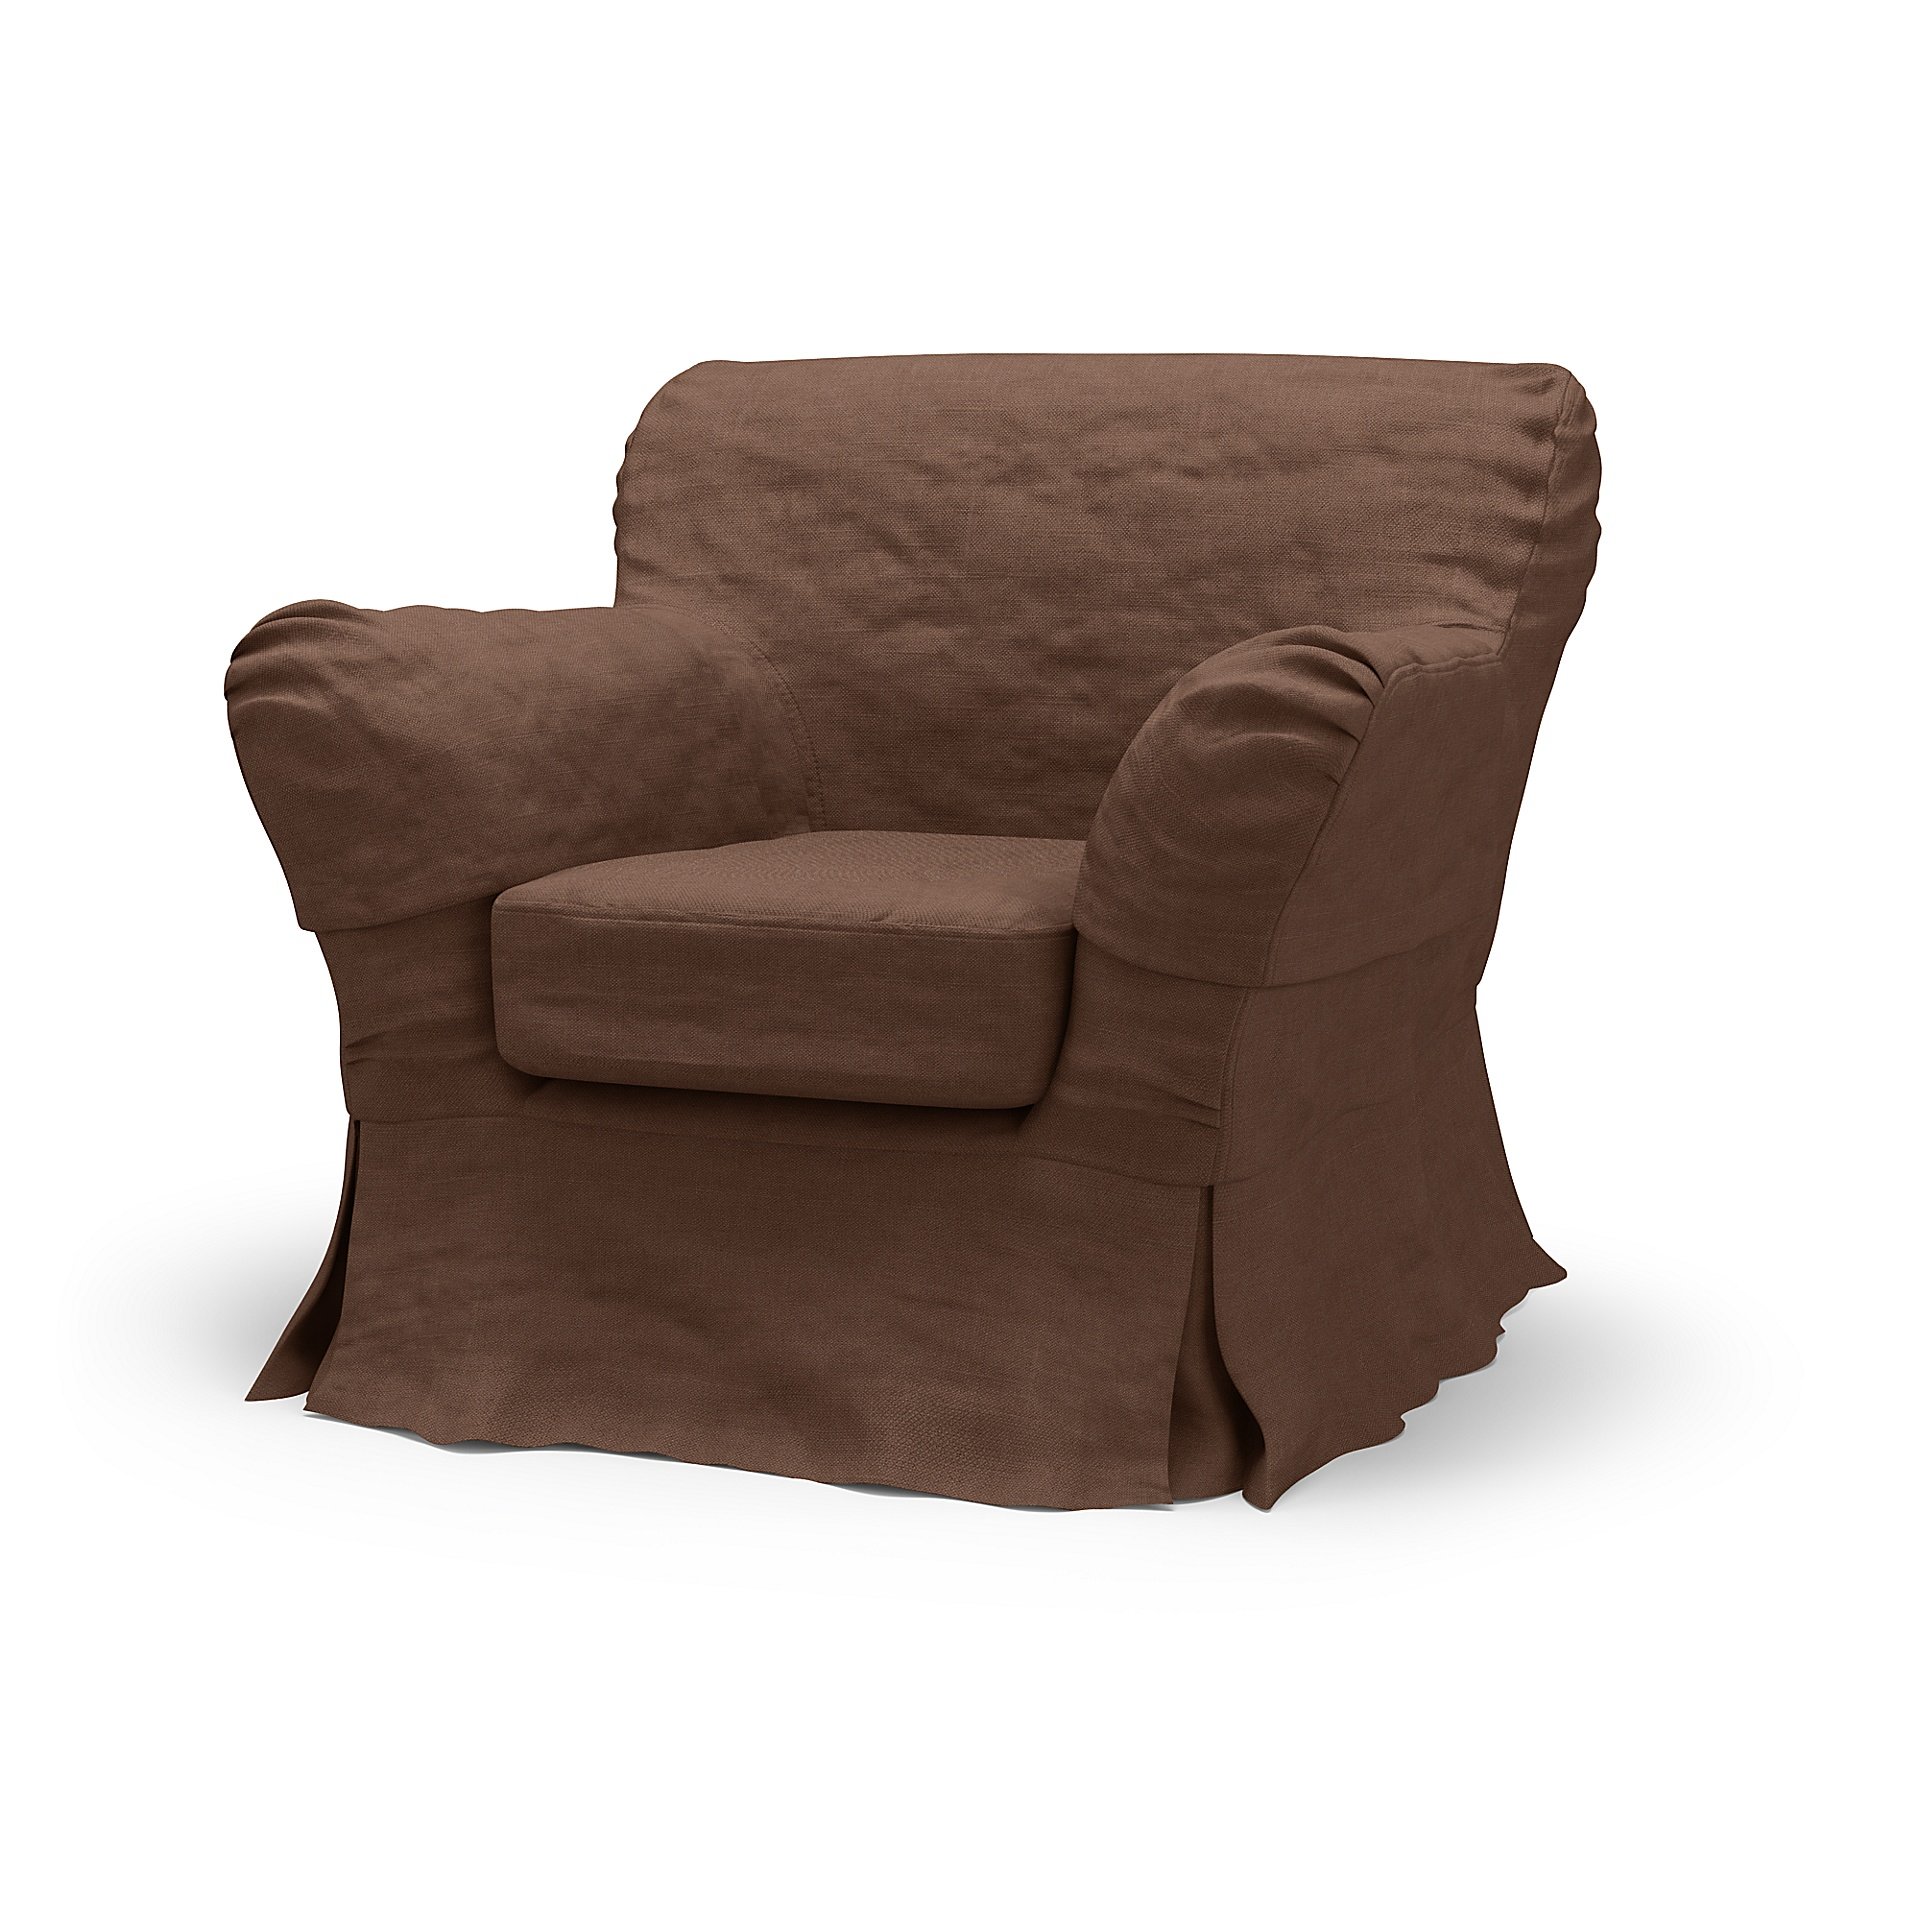 IKEA - Tomelilla Low Back Armchair Cover (Standard model) Loose Fit, Chocolate, Linen - Bemz